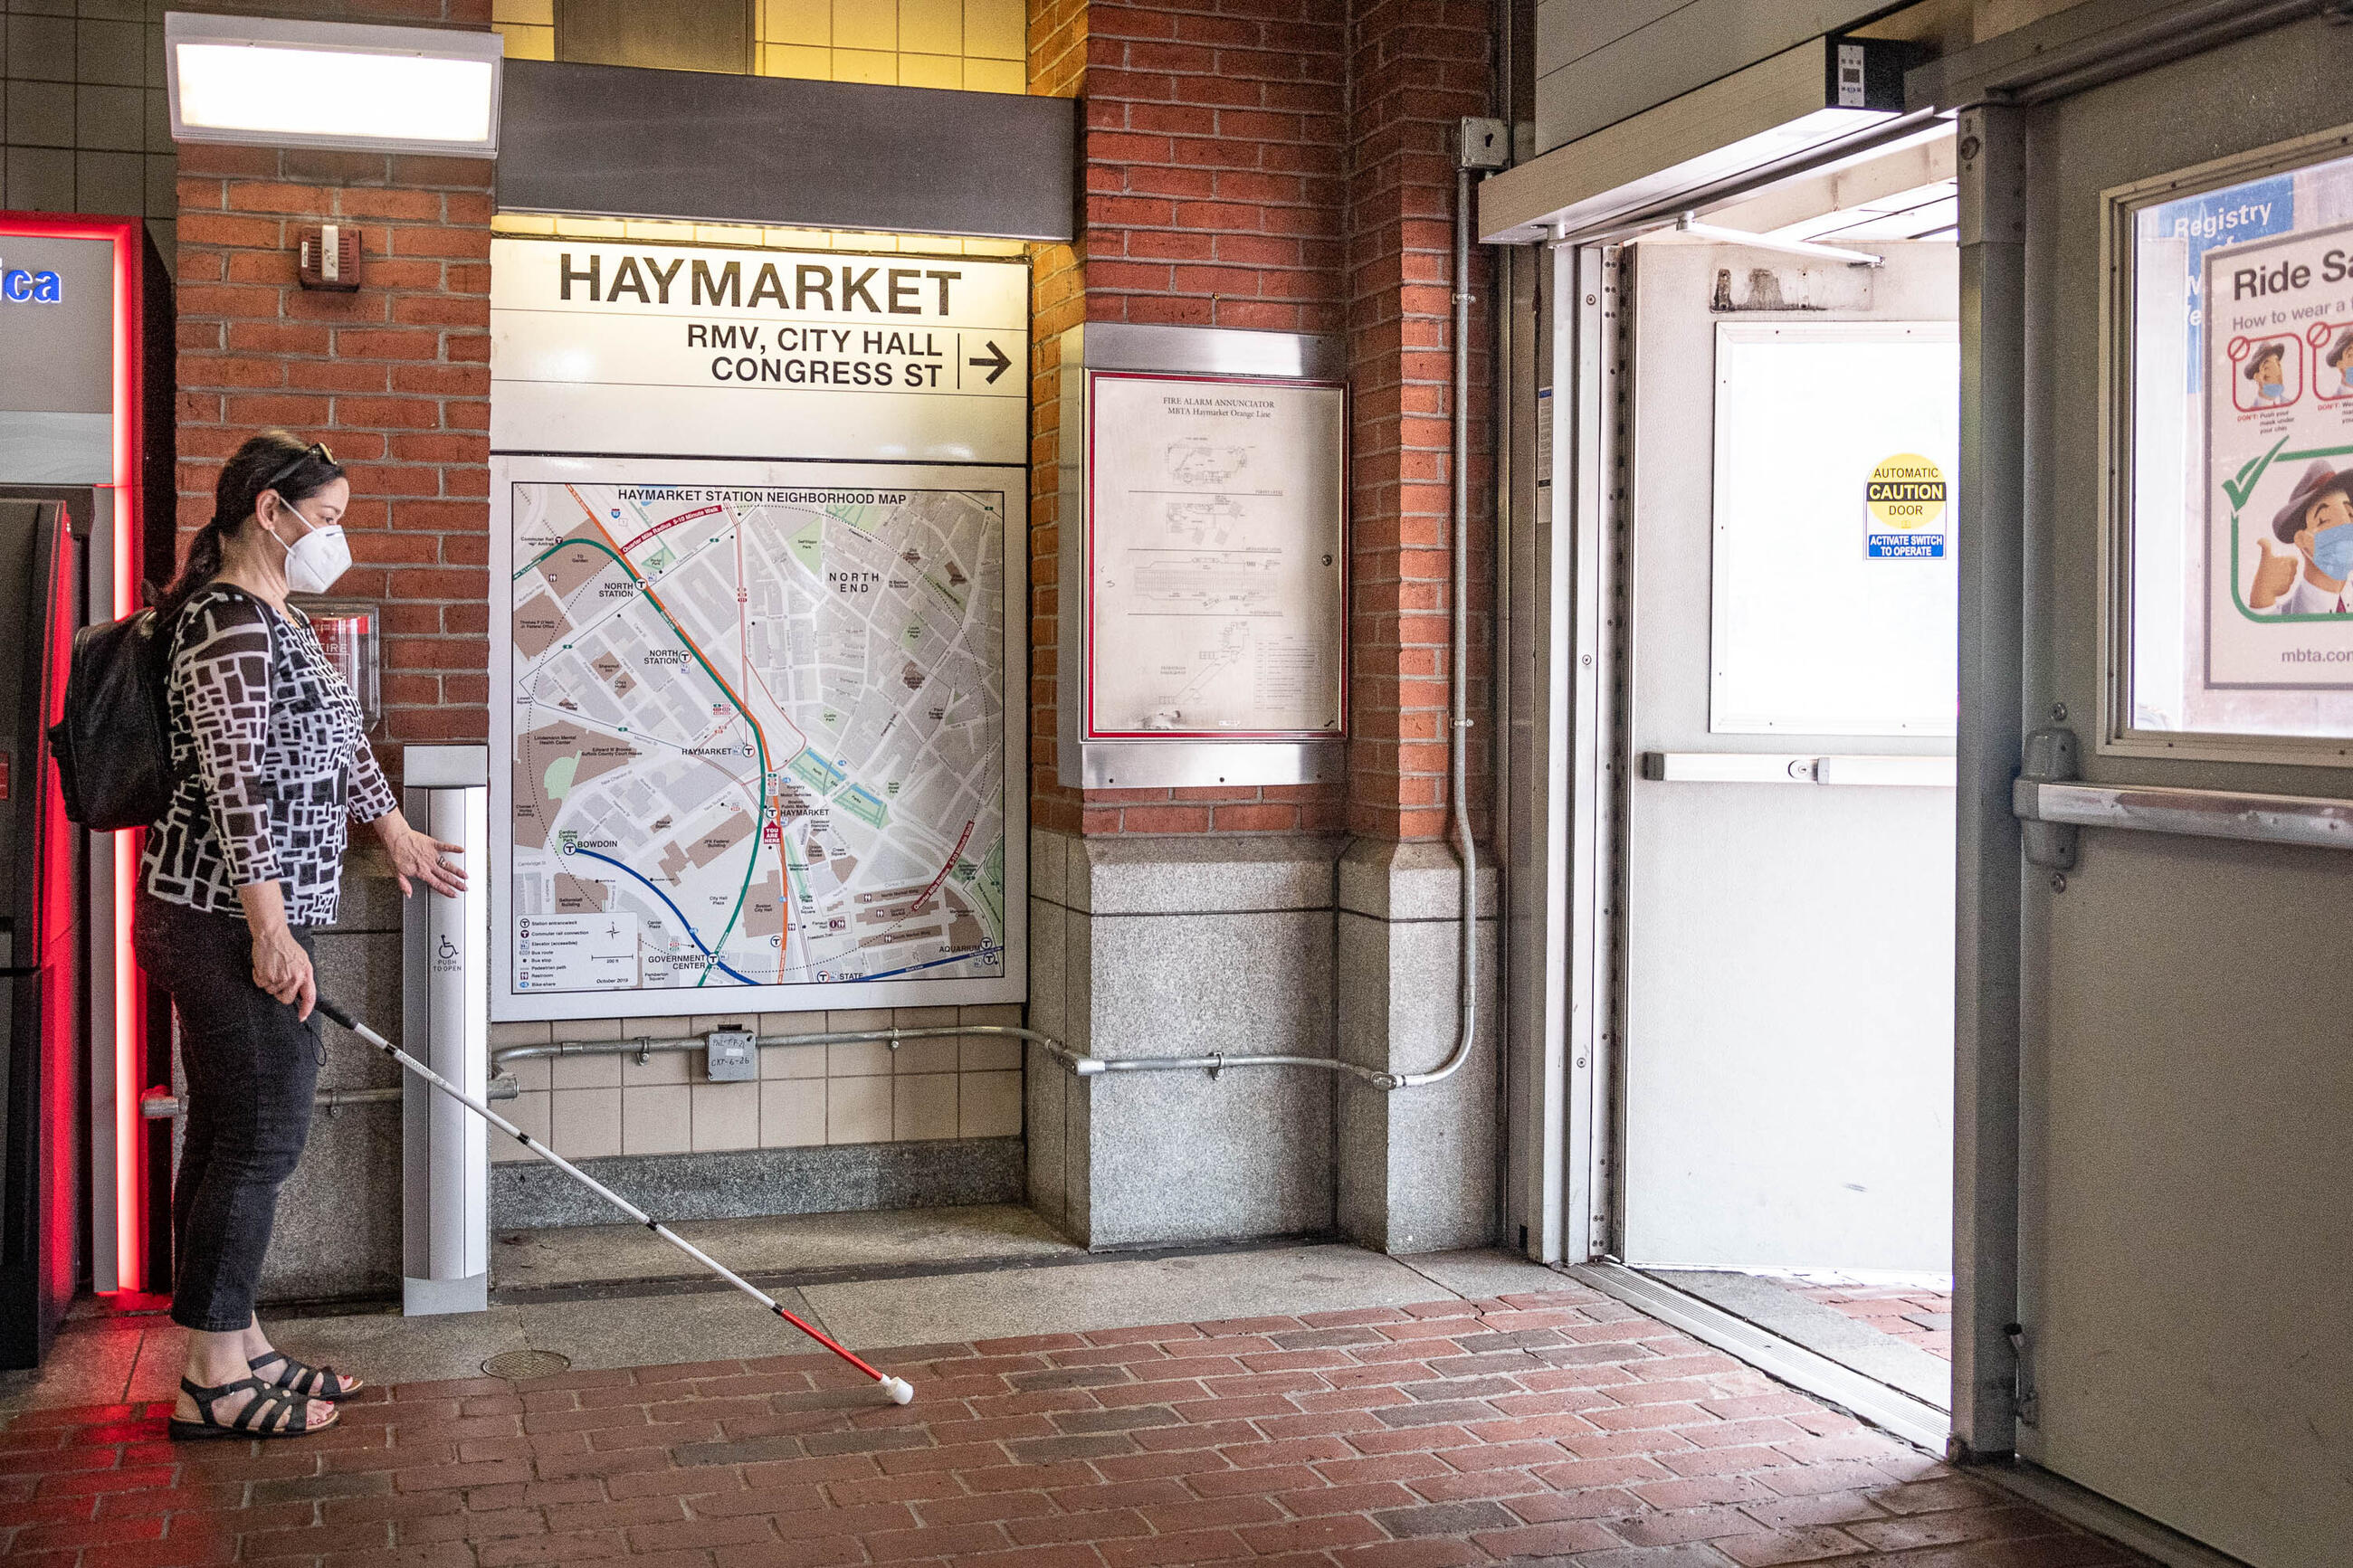 a person wearing sandals, pants, a patterned long sleeve shirt, a small backpack, a kn95 mask, and sunglasses on their head is holding a white cane and pressing the door opener button for the door in front of them. The person is inside Haymarket station at the entrance. The button is very long and can be pressed from hip height all the way down to the floor.